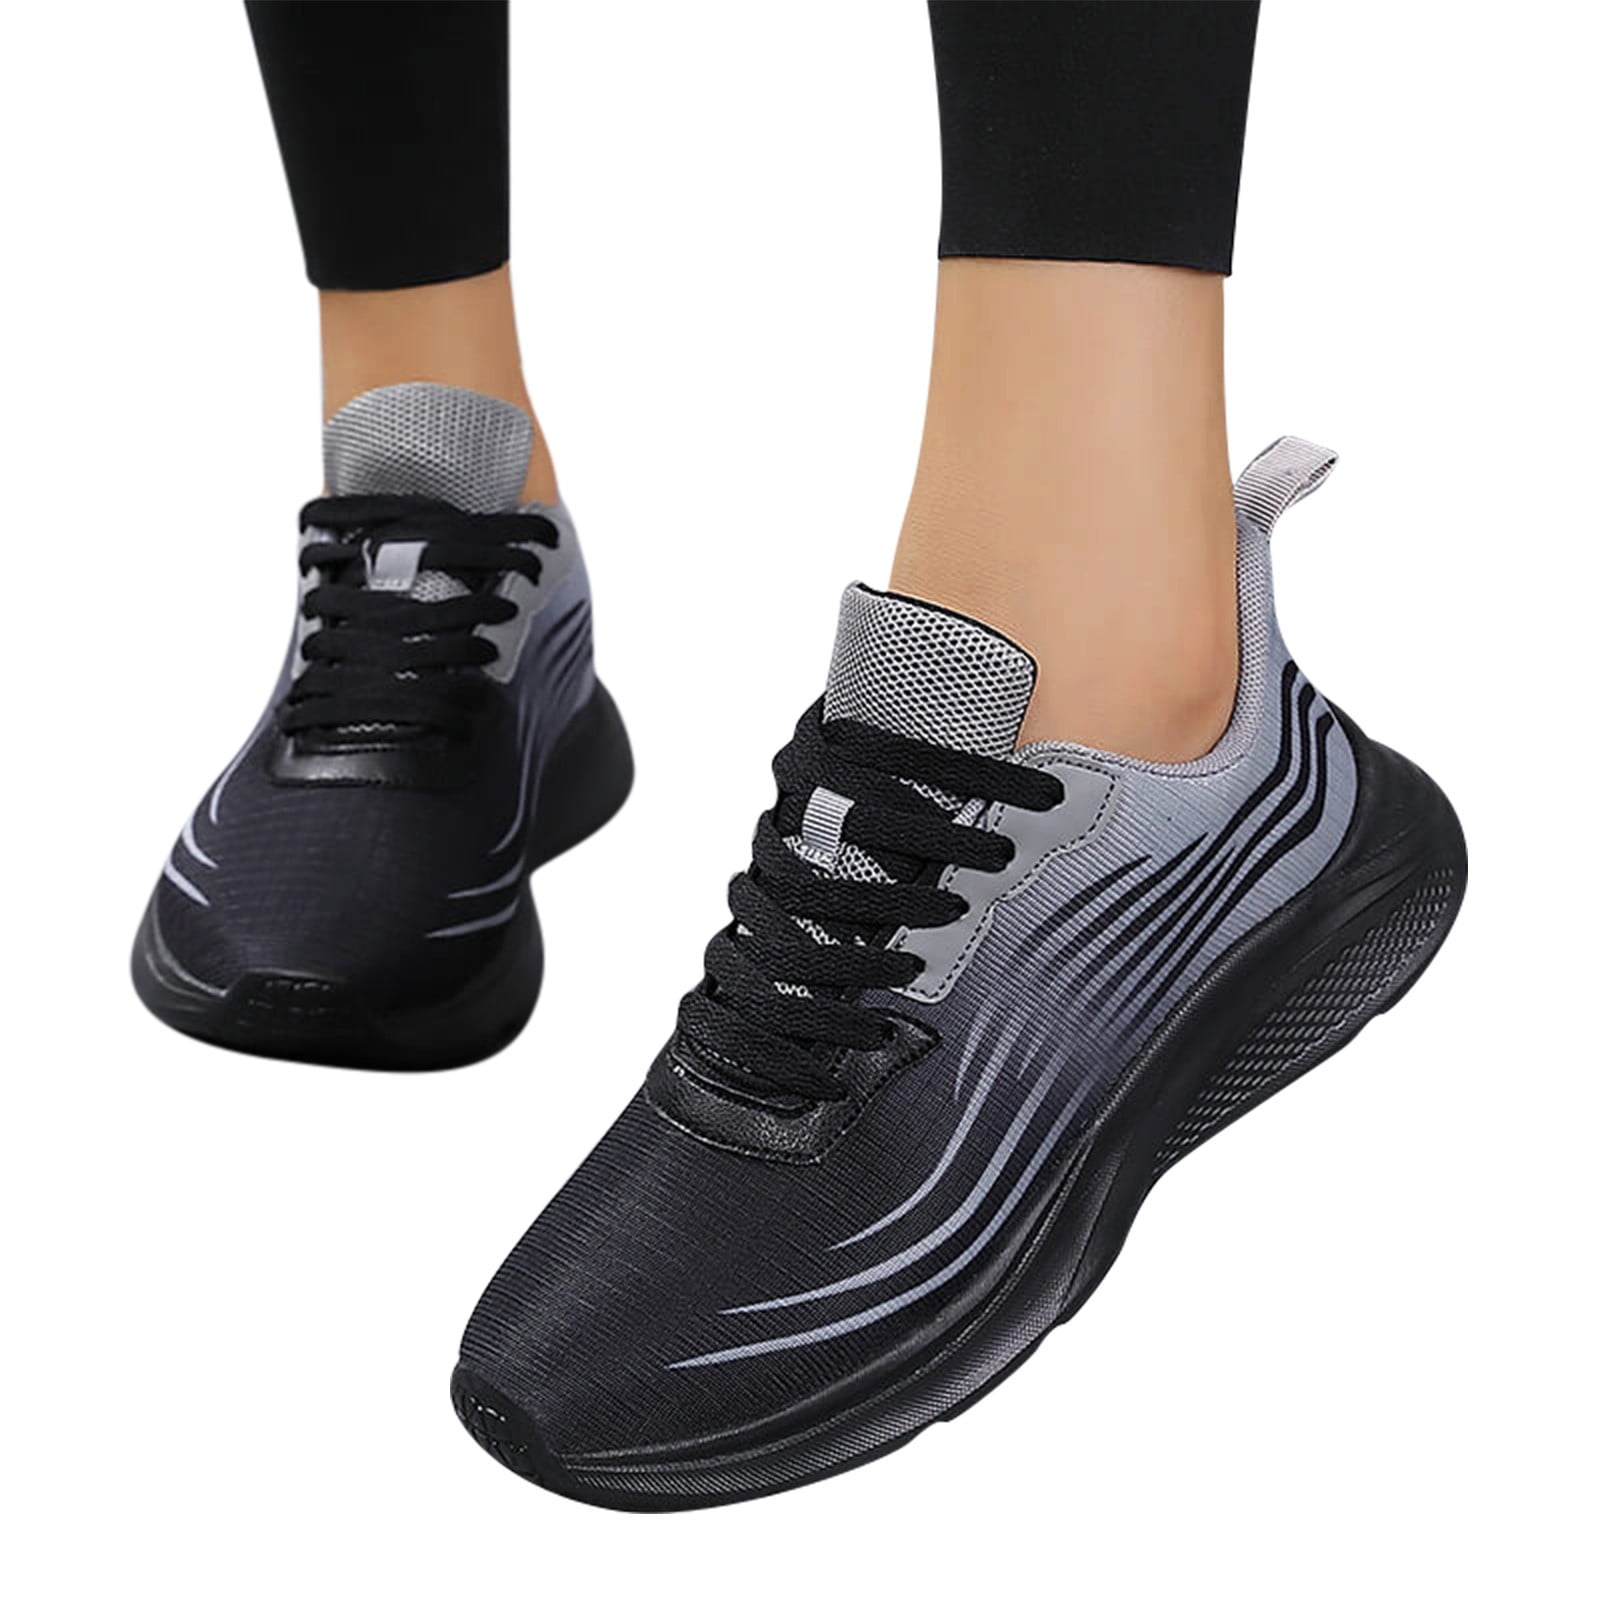 Women's Leisure Breathable Mesh Outdoor Fitness Running Sport Sneakers Shoes Hyper Soft Sneakers for Women Womens Club C Sneaker Roller Skate for Women Shoes Sneakers Casual - Walmart.com